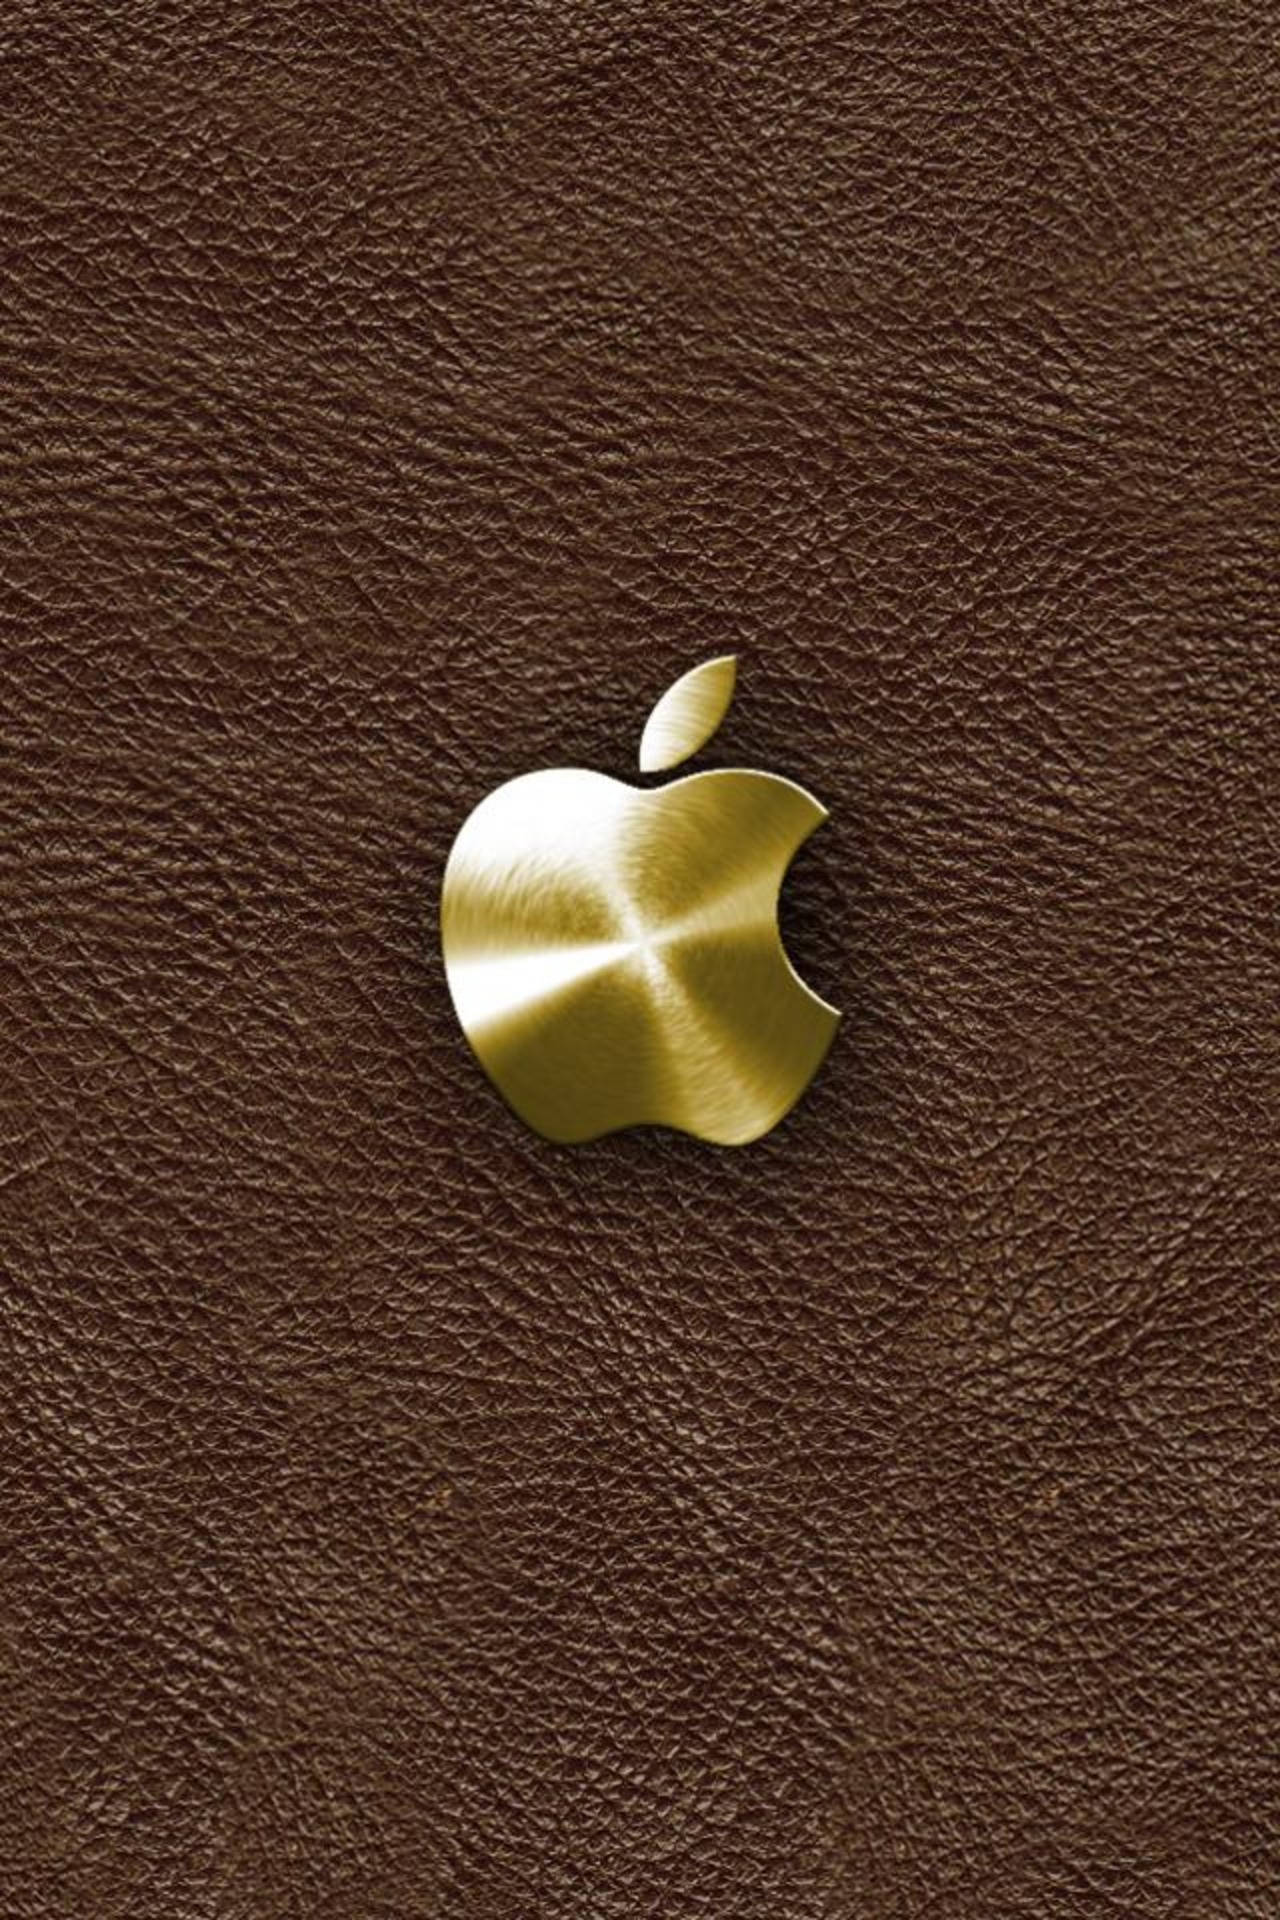 Iphone6s Gold: Iphone 6s Gold Wallpaper